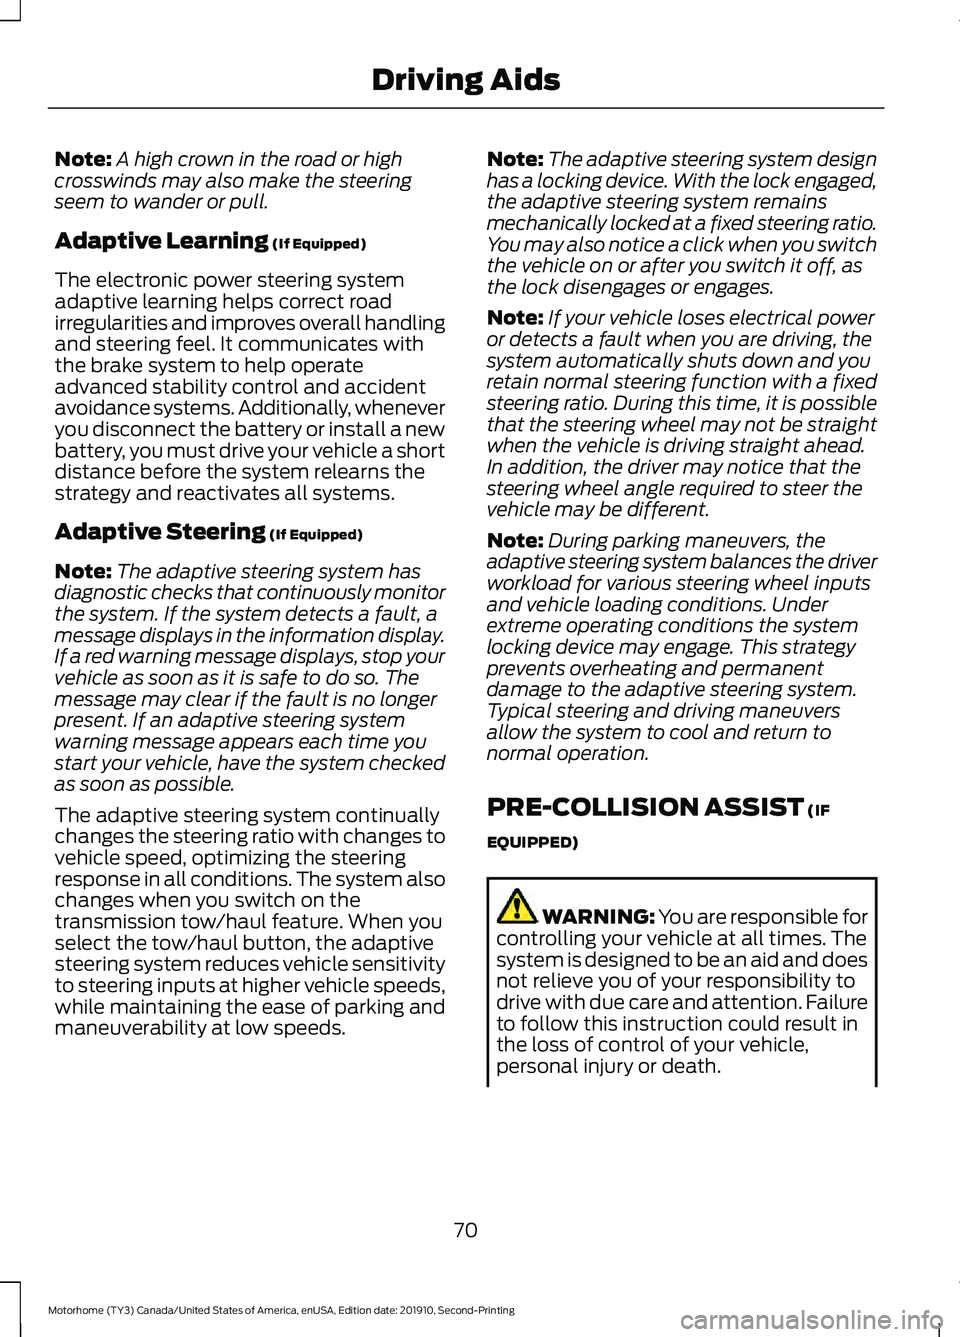 FORD F-59 2020  Owners Manual Note:
A high crown in the road or high
crosswinds may also make the steering
seem to wander or pull.
Adaptive Learning (If Equipped)
The electronic power steering system
adaptive learning helps correc